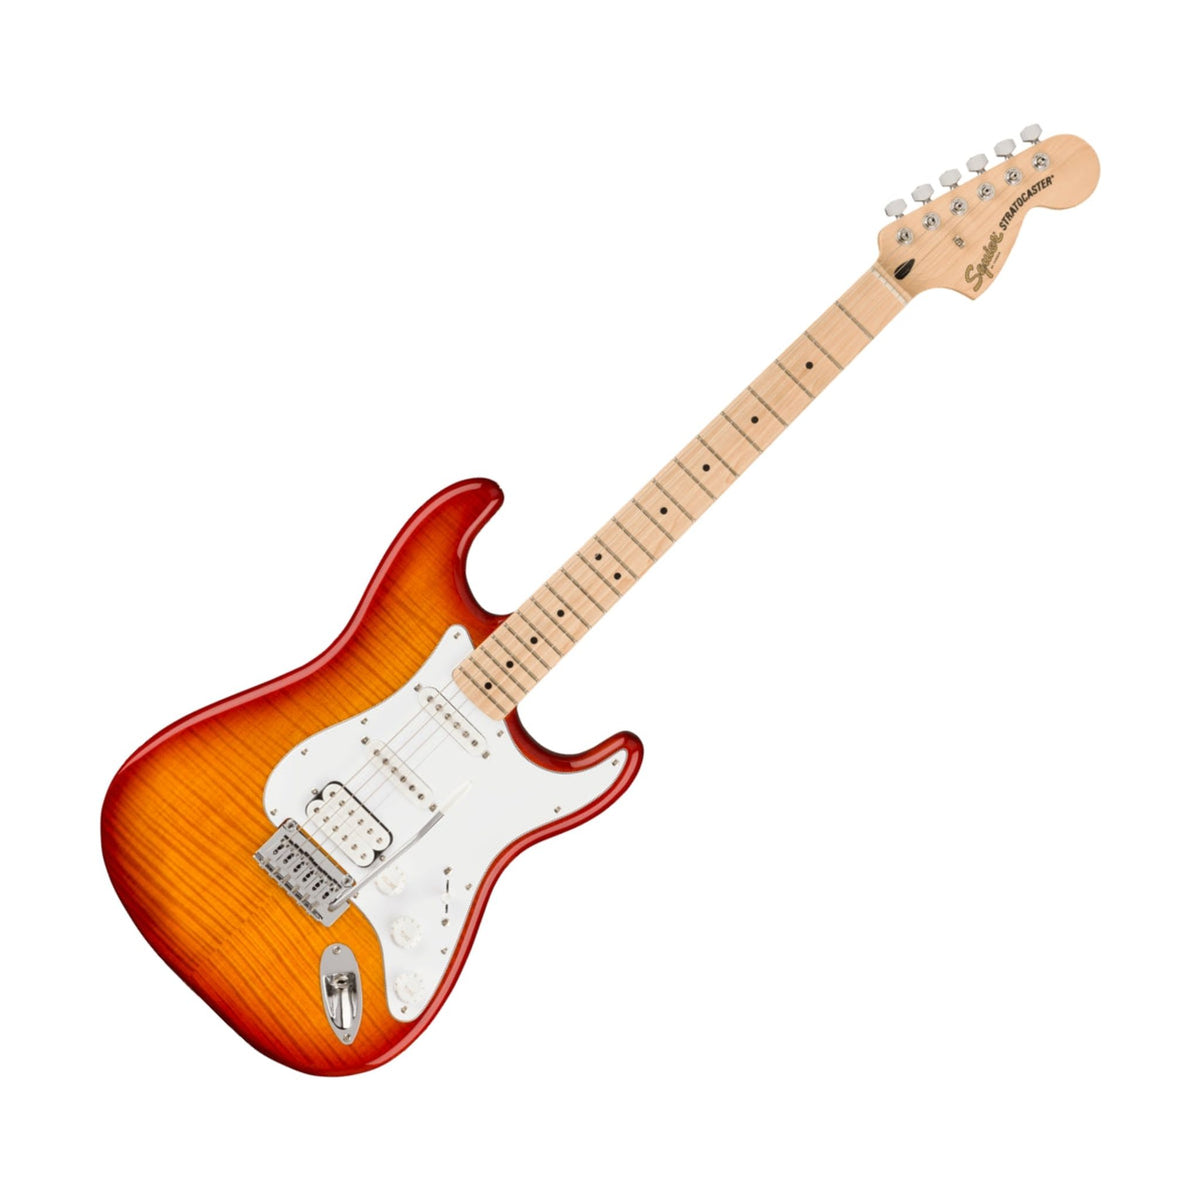 The Fender Squier Stratocaster Affinity Series Stratocaster offers a superb gateway into the time-honored Fender family. The Affinity Series™ Stratocaster delivers legendary design and quintessential tone for today’s aspiring guitar hero. 